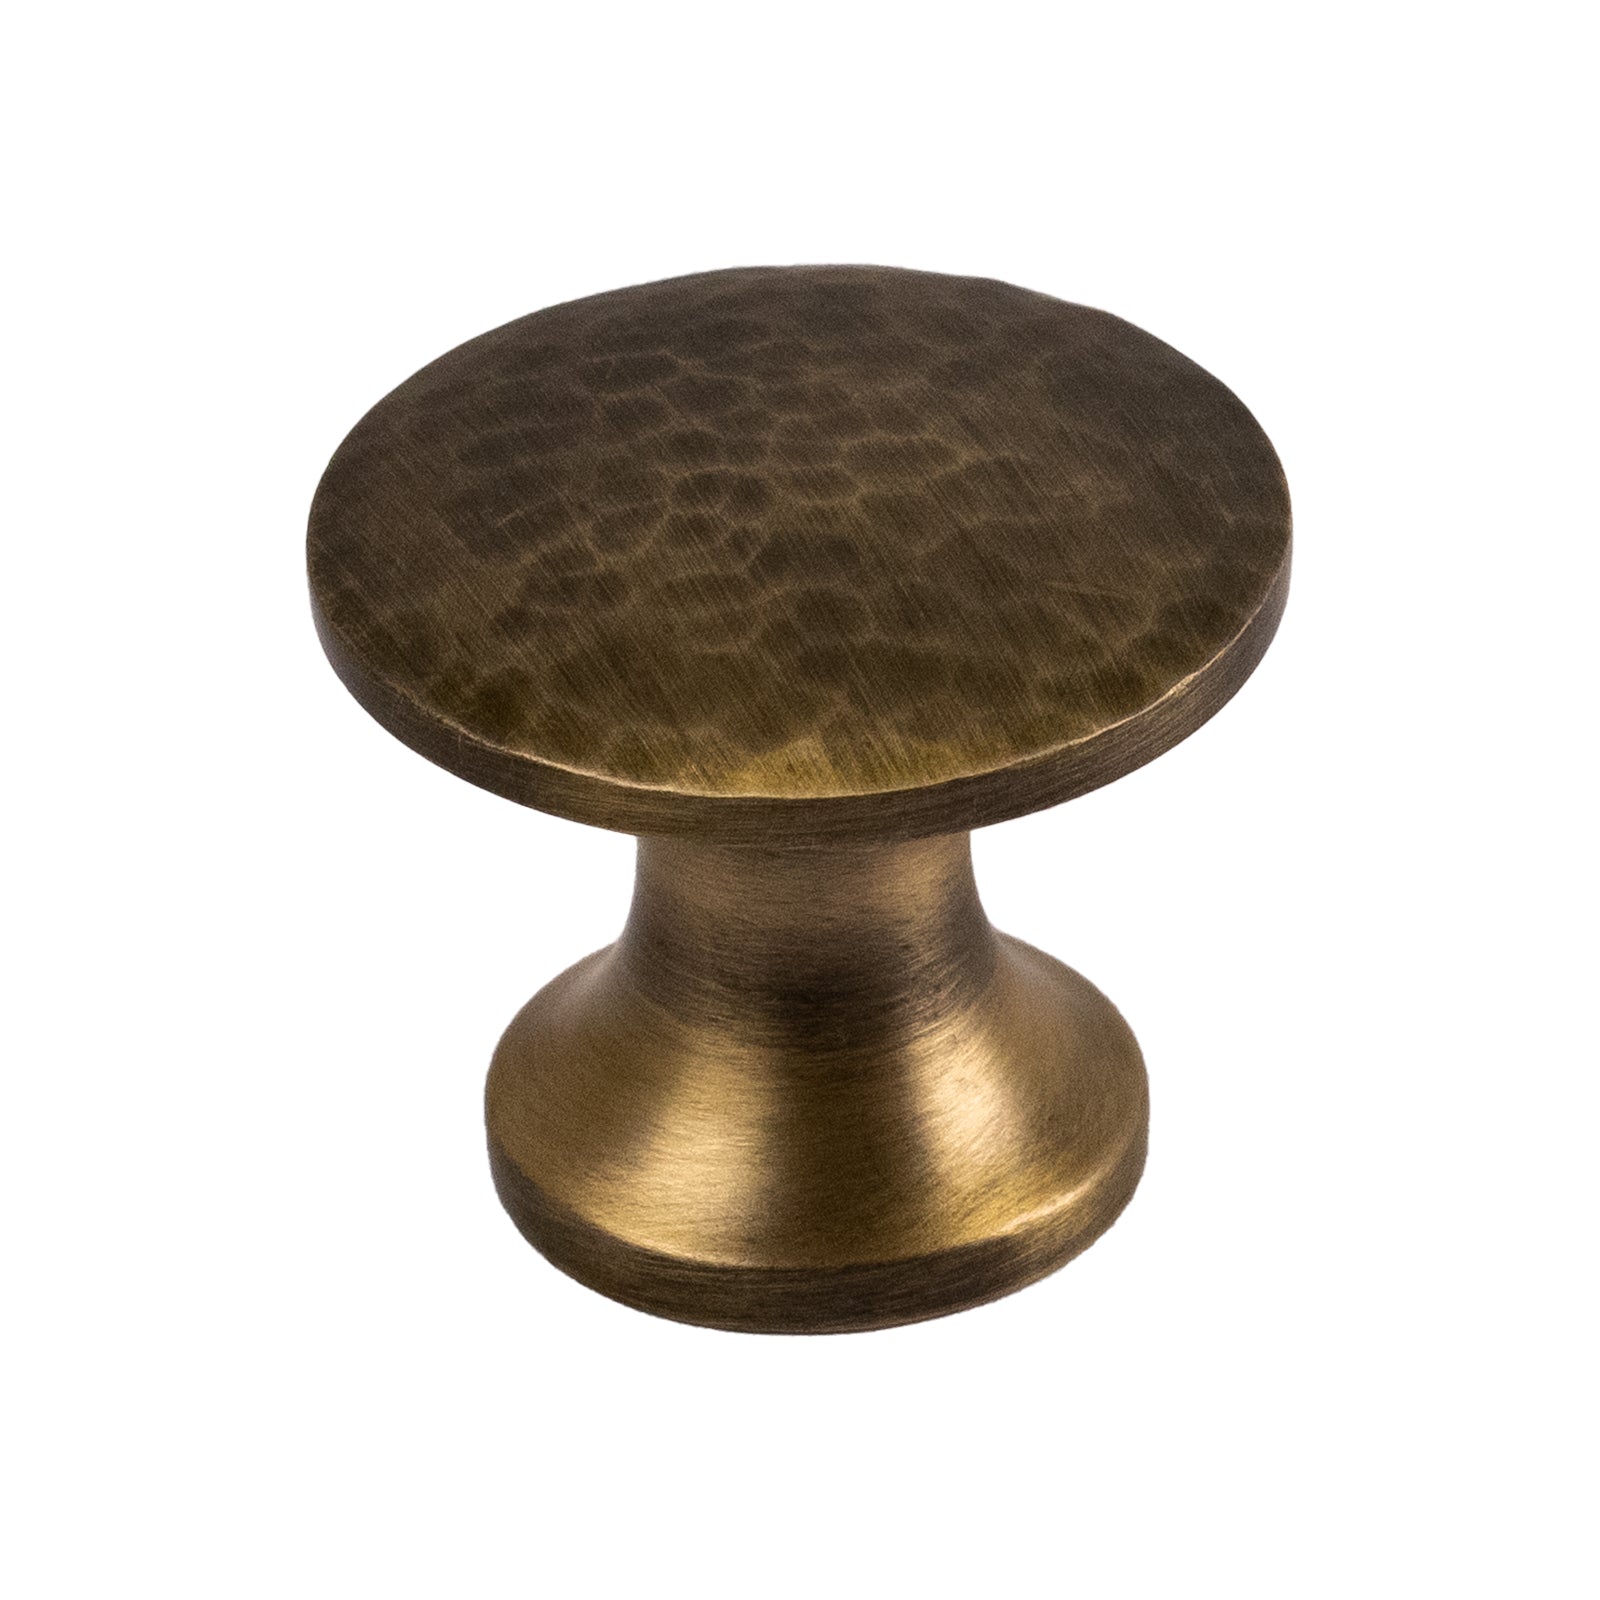 Hammered Classic Cabinet Knobs in Antique Brass 24mmSHOW